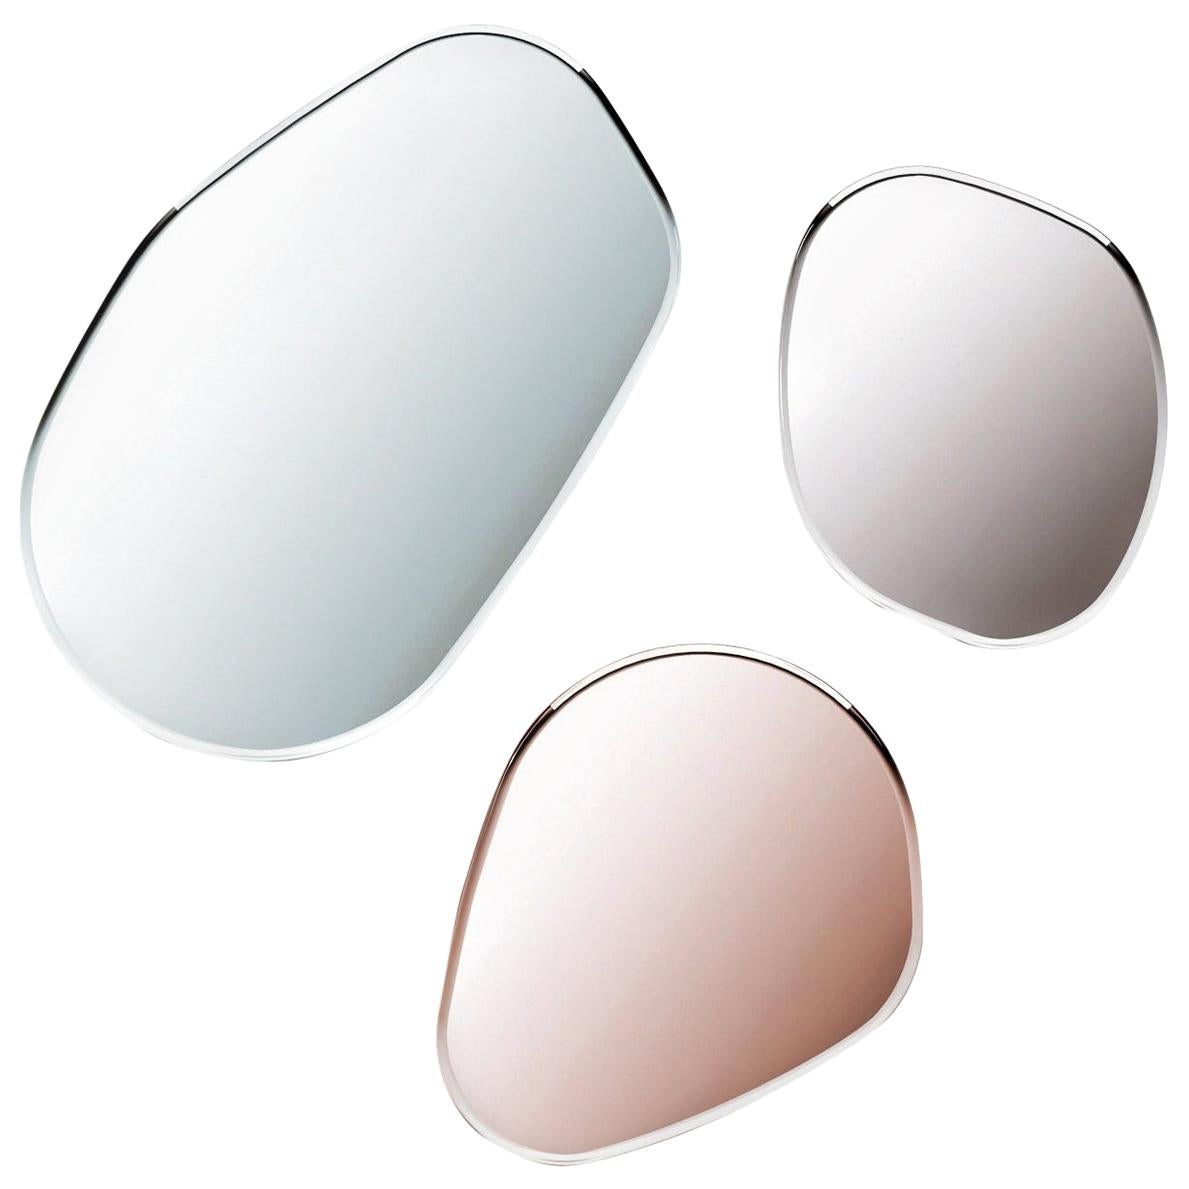 Set of 3 Rugiada Wall Mirrors, Made in Italy